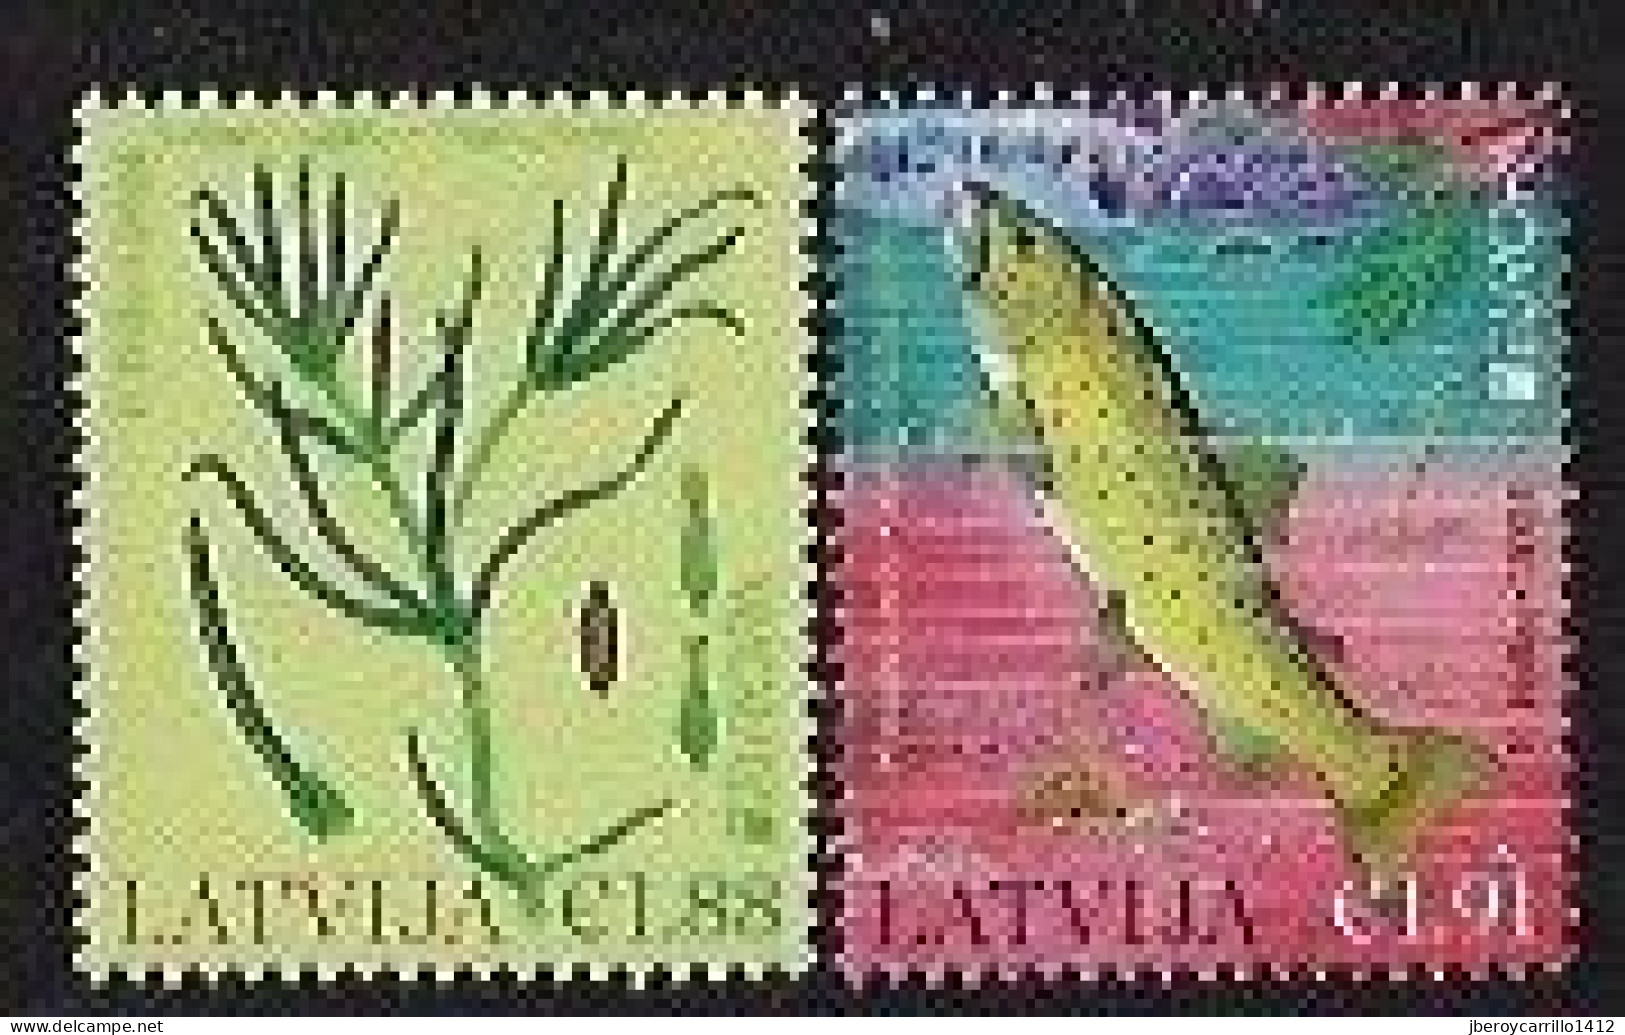 LETONIA /LAVTIA /LETTLAND /LETTONIE  - EUROPA-CEPT 2024 -"UNDERWATER FLORA And FAUNA".- SET Of The 2 STAMPS-  N - 2024